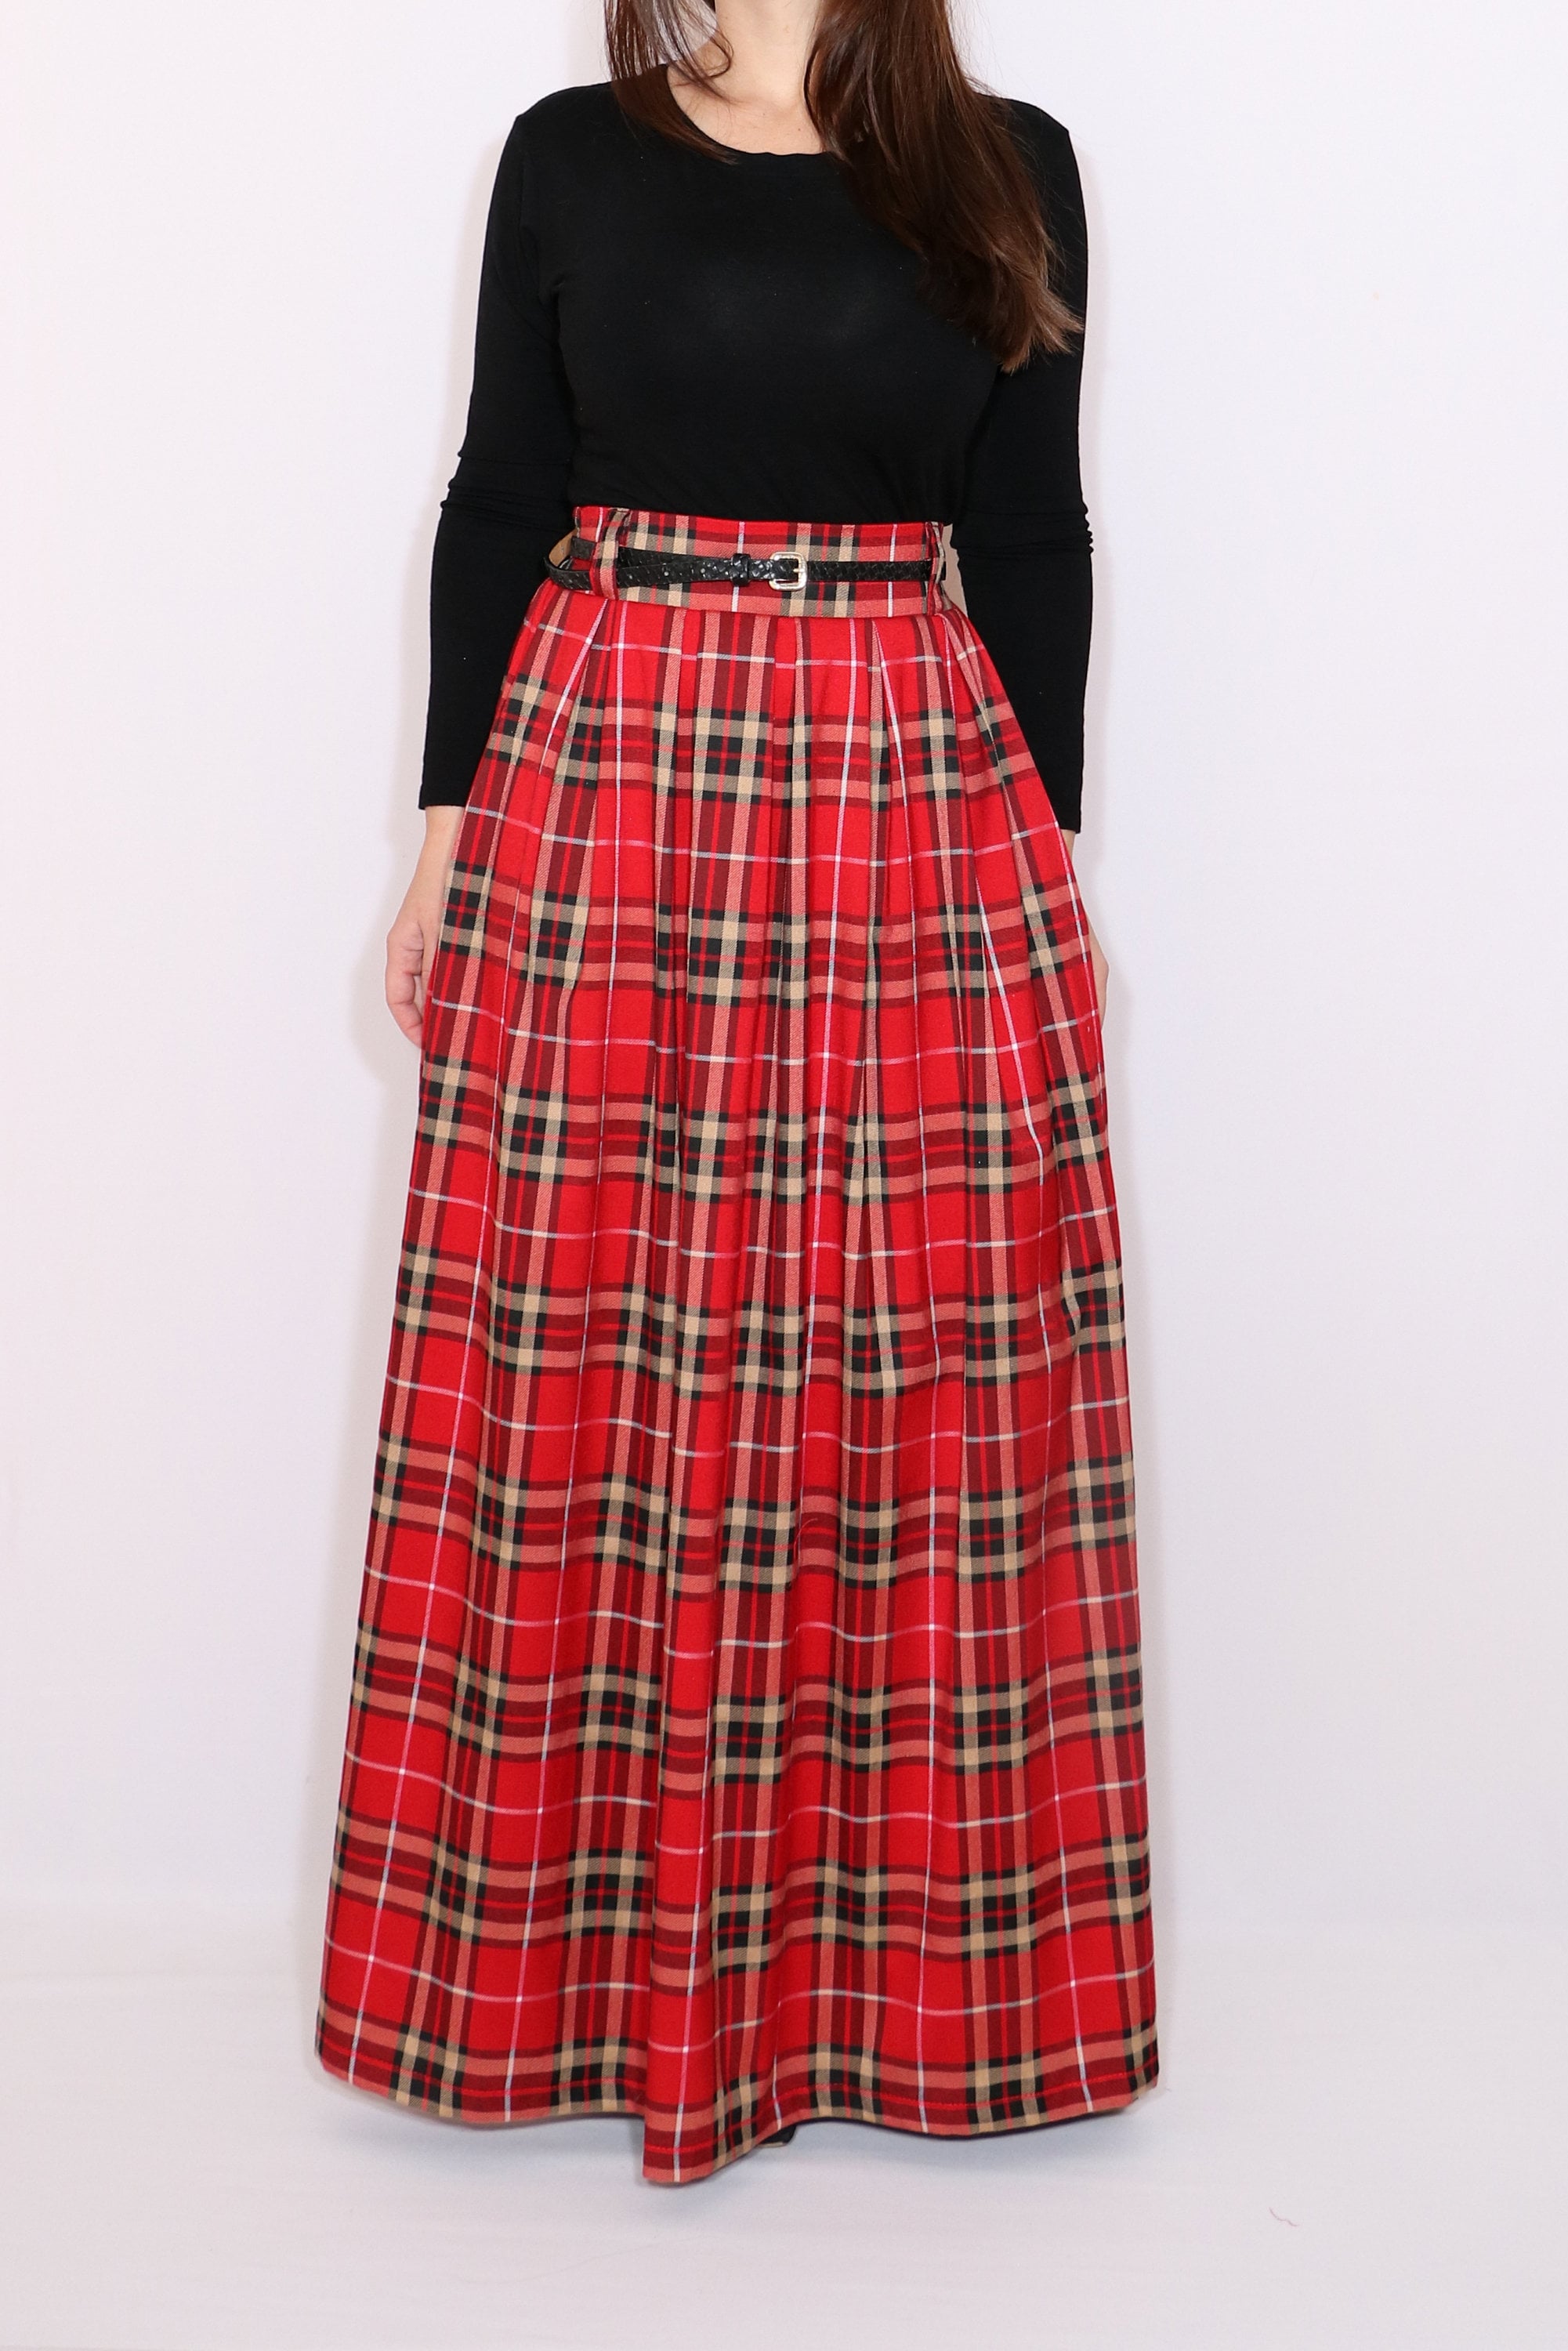 Red Long Plaid Skirt With Pockets, Red Tartan Skirt, Maxi